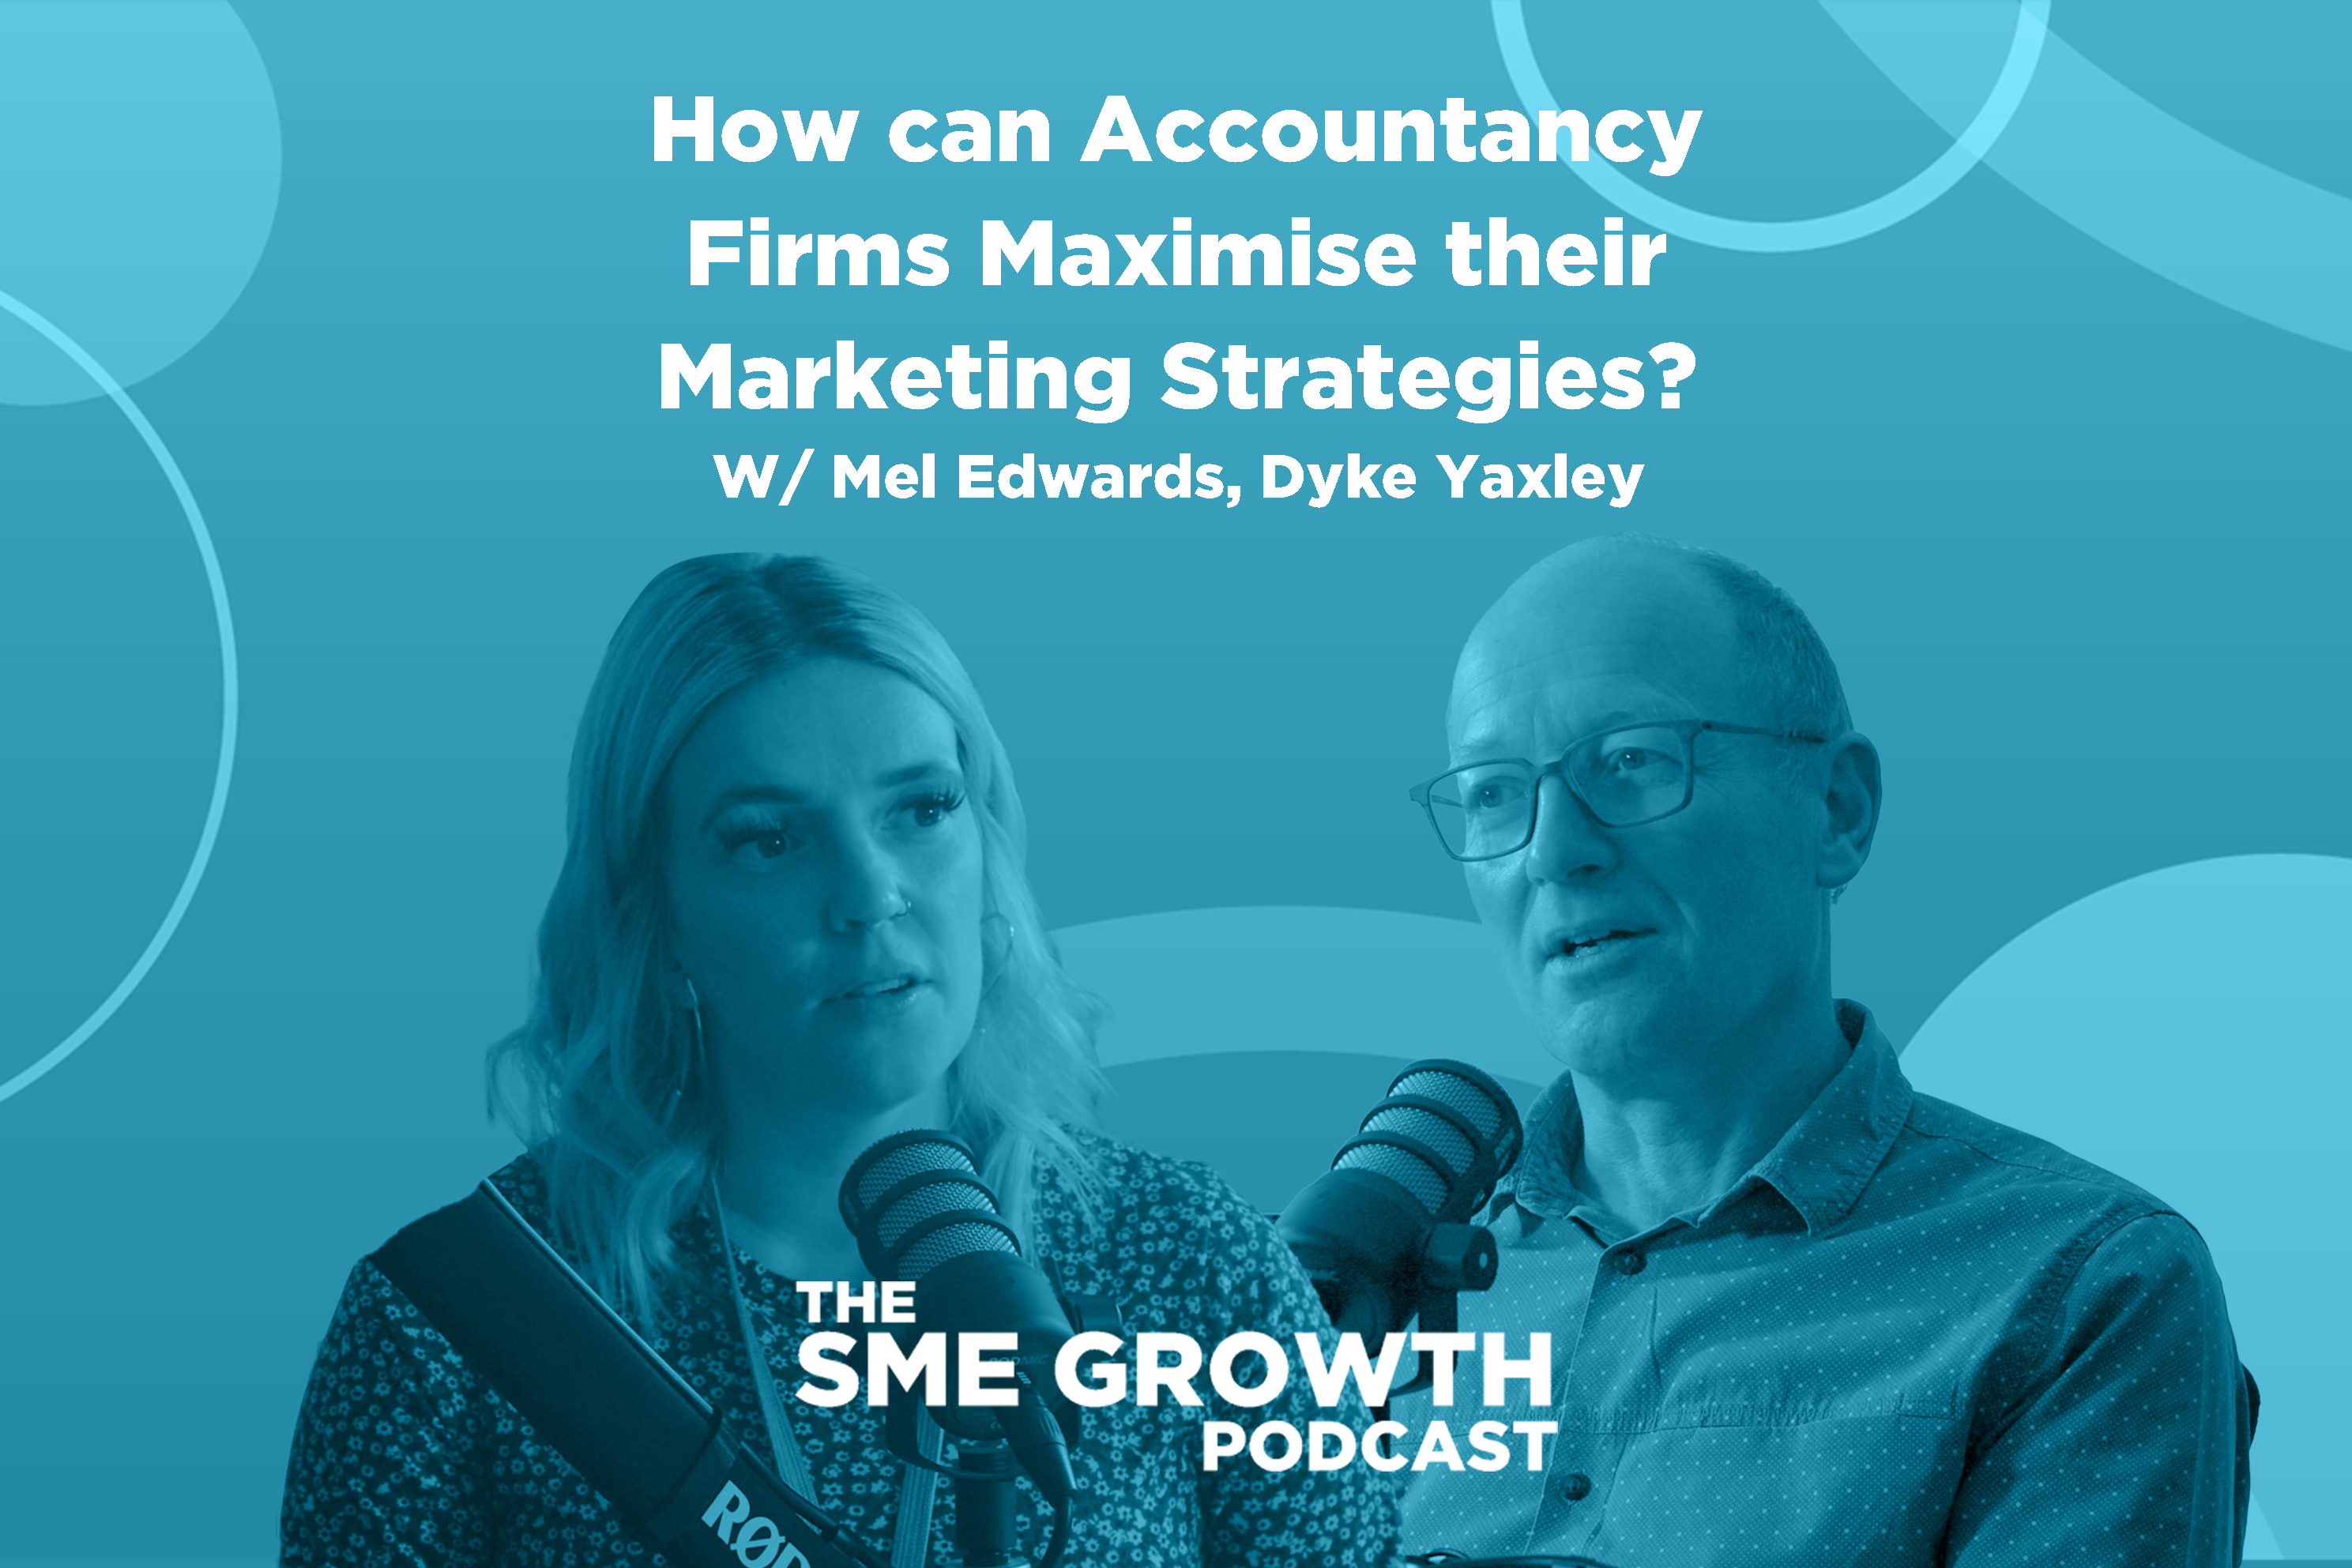 How can Accountancy Firms Maximise their marketing strategies? The SME Growth podcast. Blue banner with two people speaking into microphones.